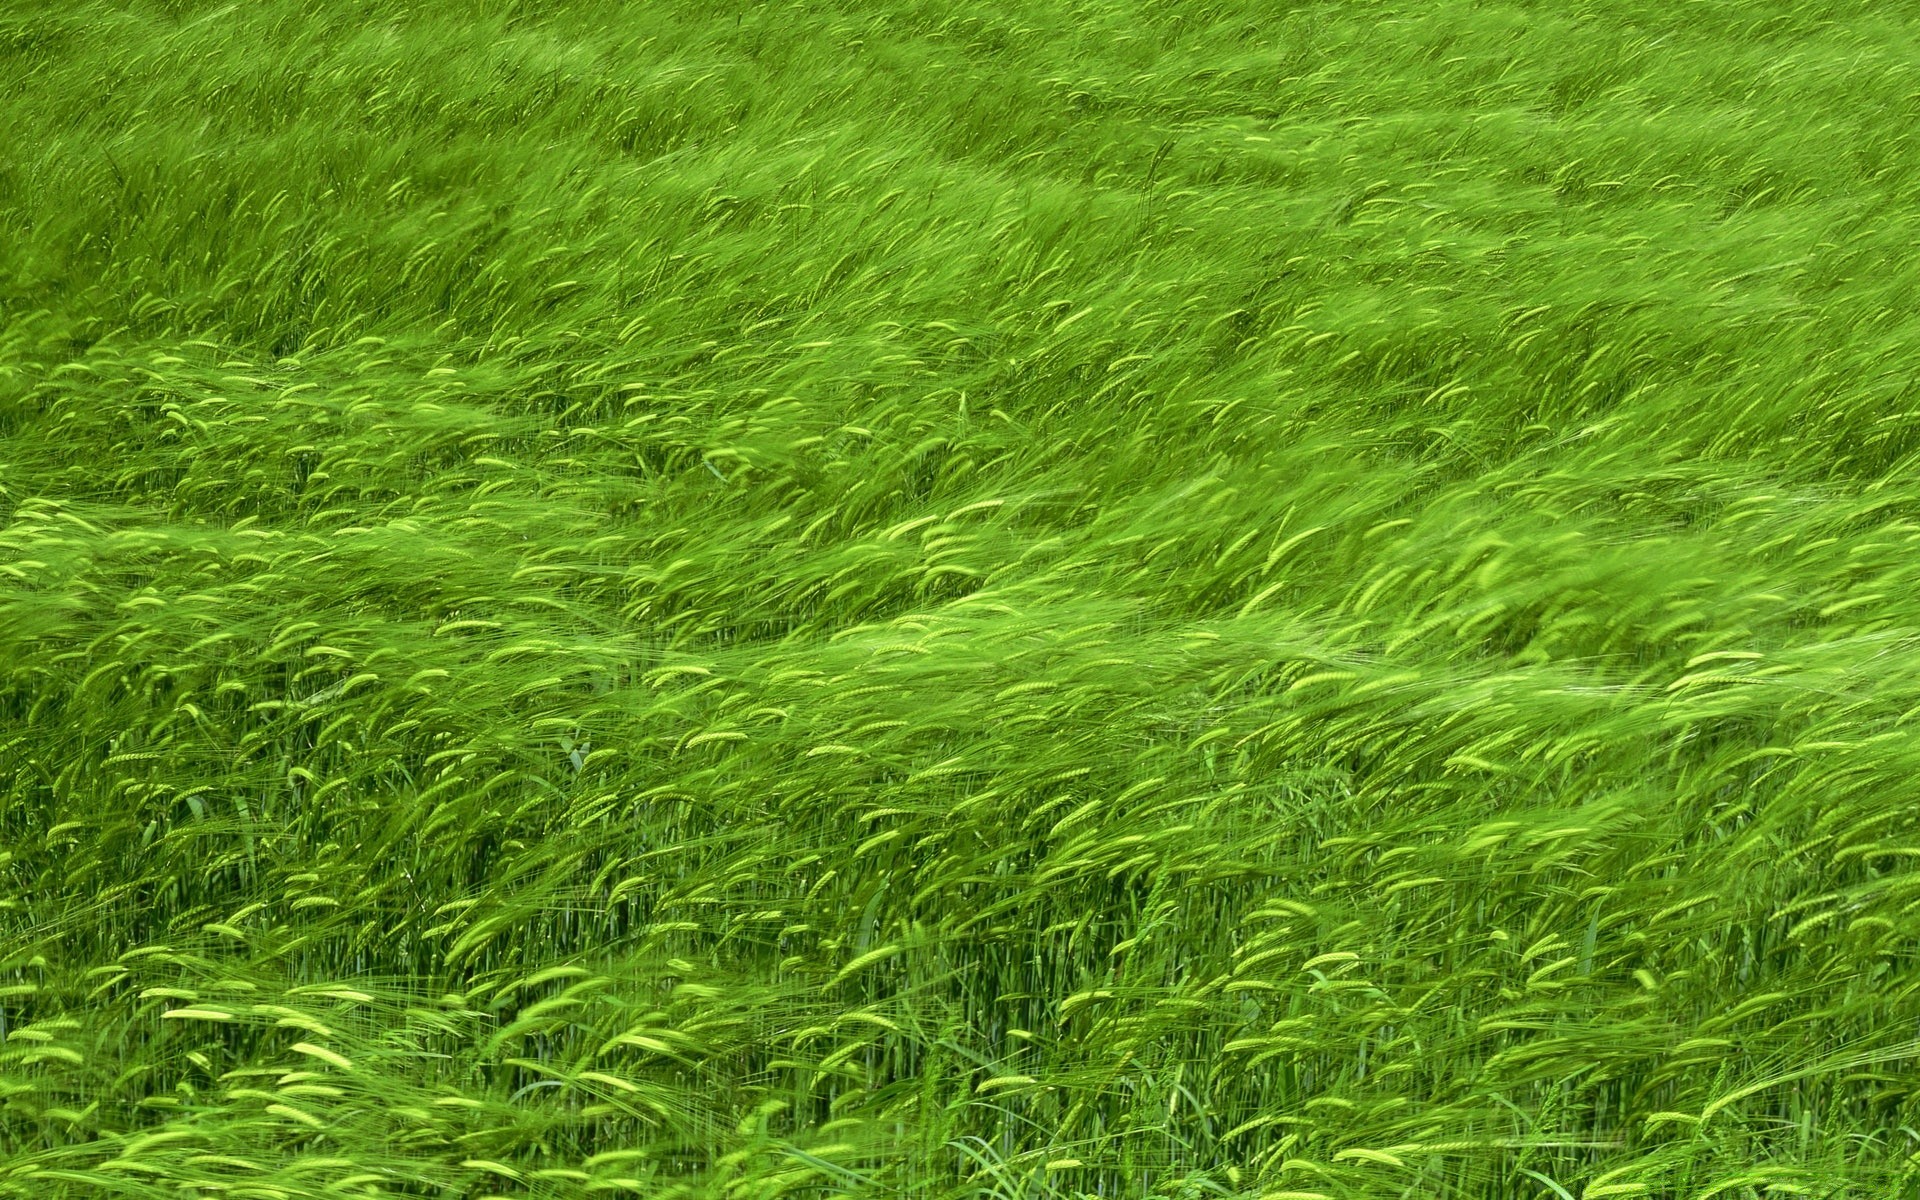 spring grass lush flora growth leaf summer nature desktop lawn field hayfield environment soil bright rural agriculture vibrant pasture freshness